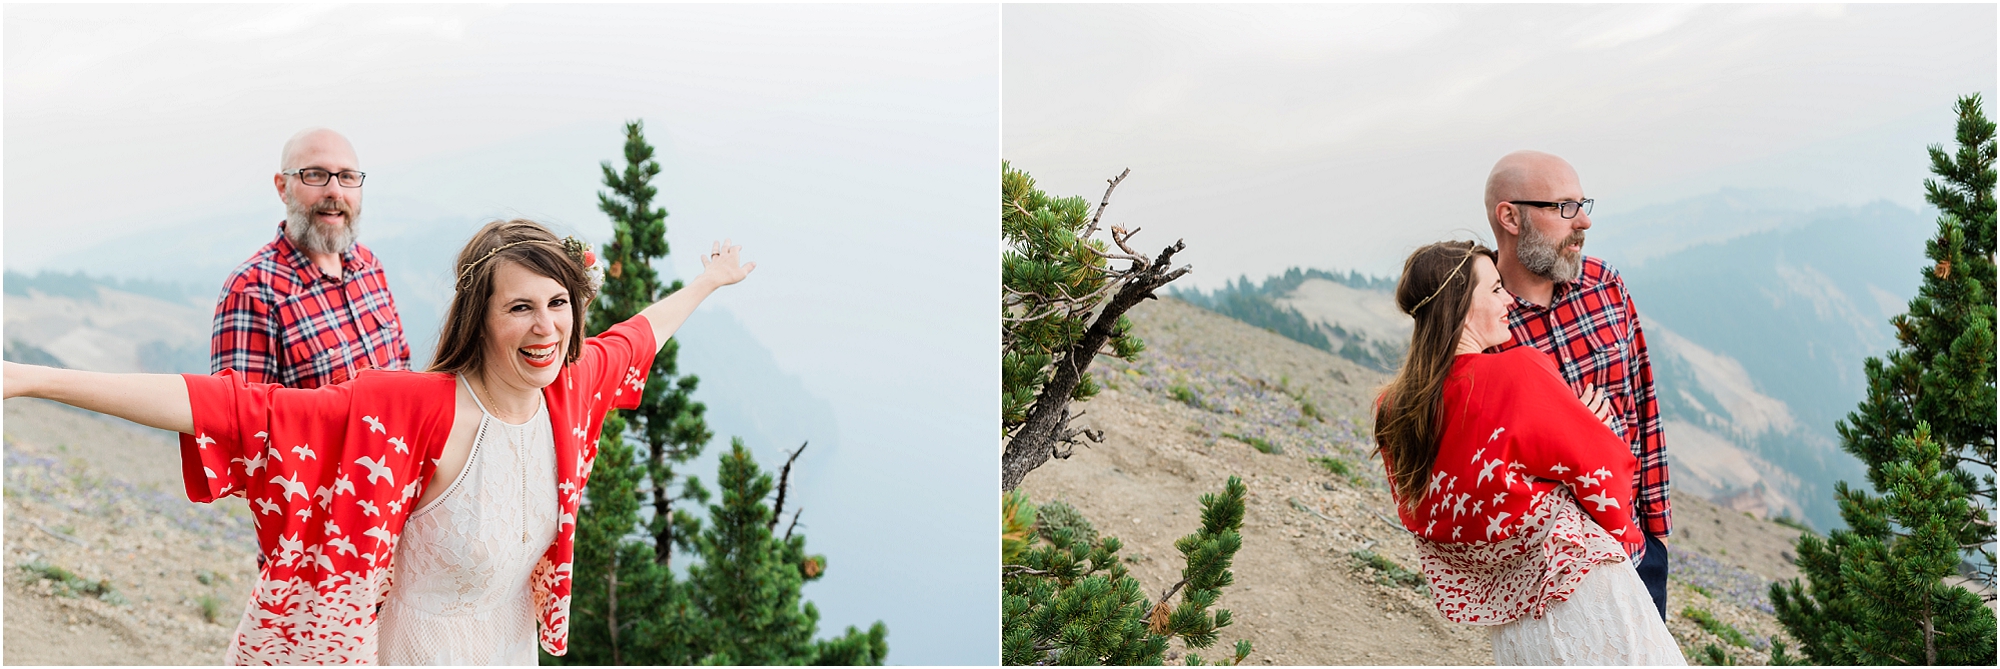 A bride pretends to fly as she's on top of the Cloud Cap Overlook after her amazing, intimate Crater Lake elopement in Oregon! | Erica Swantek Photography